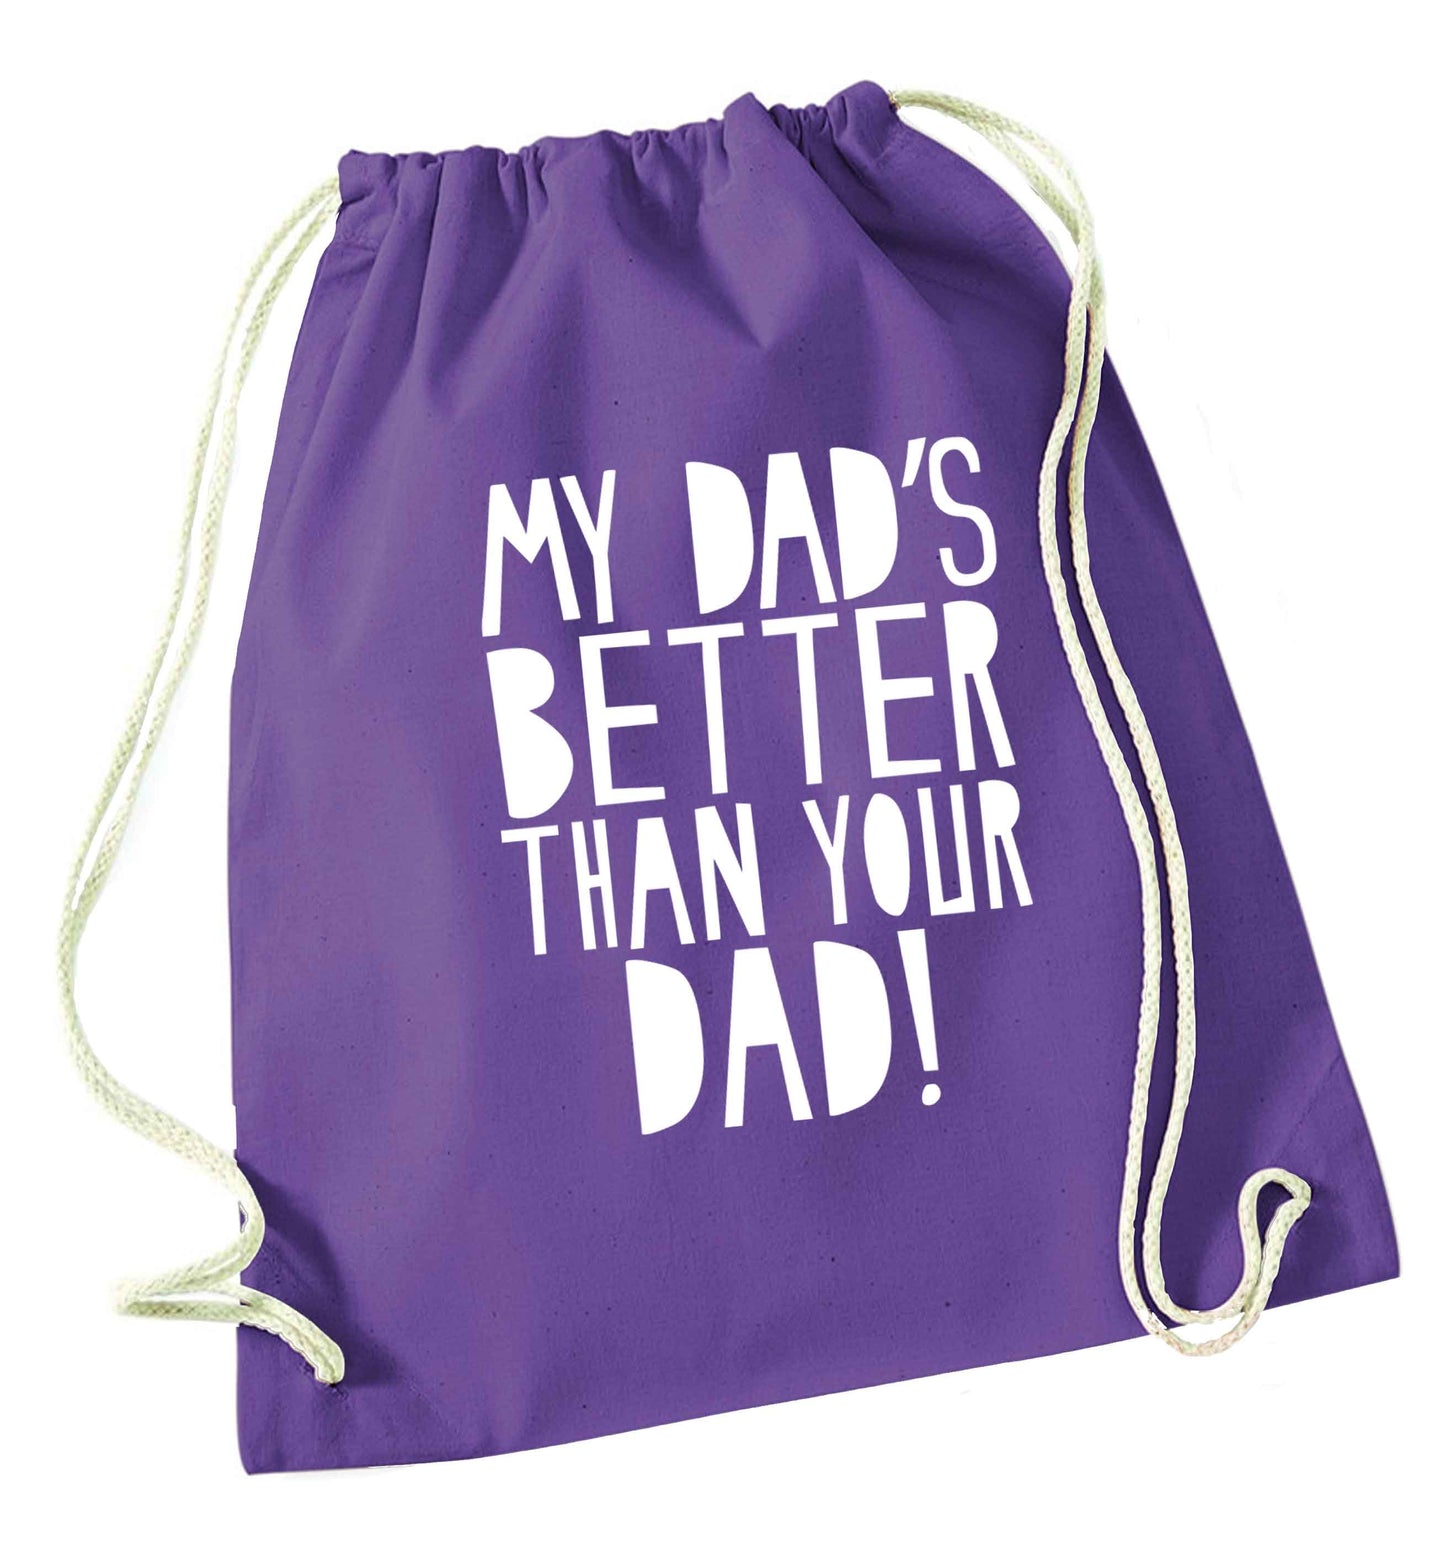 My dad's better than your dad! purple drawstring bag